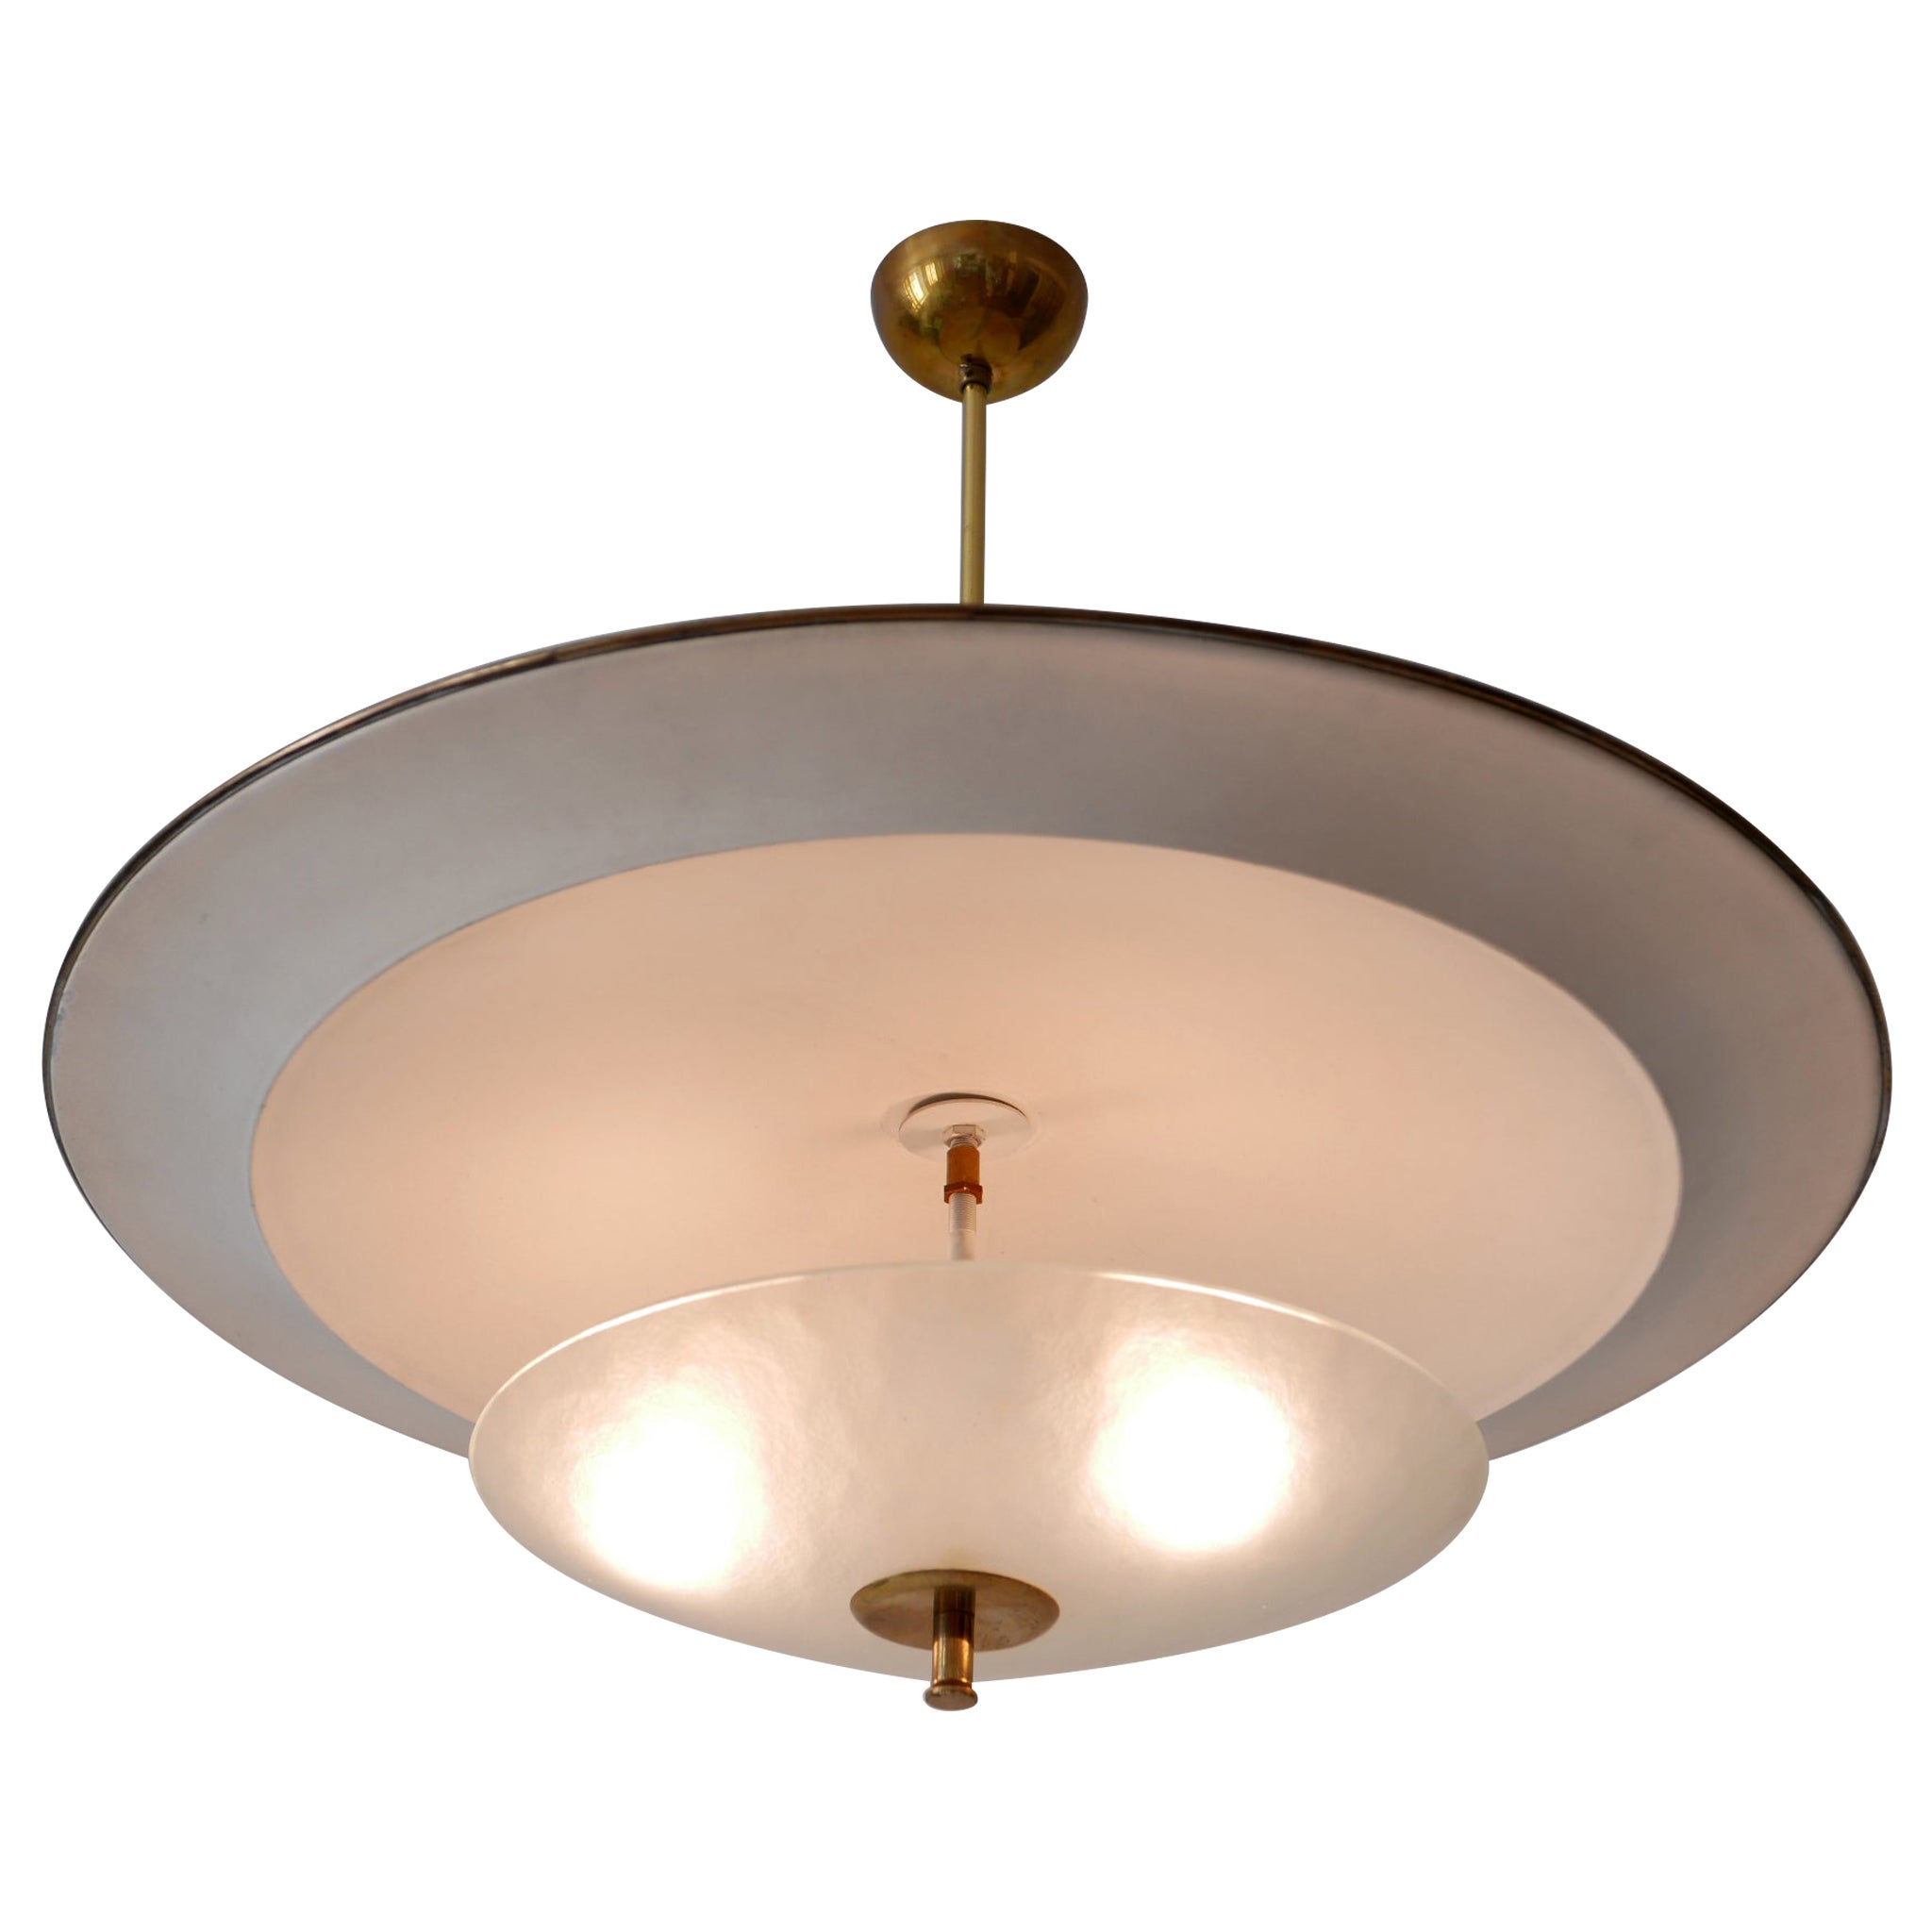 Large Mid-Century Modern 'Ufo' Ceiling Light or Pendant Lamp Germany 1950s № 3 For Sale